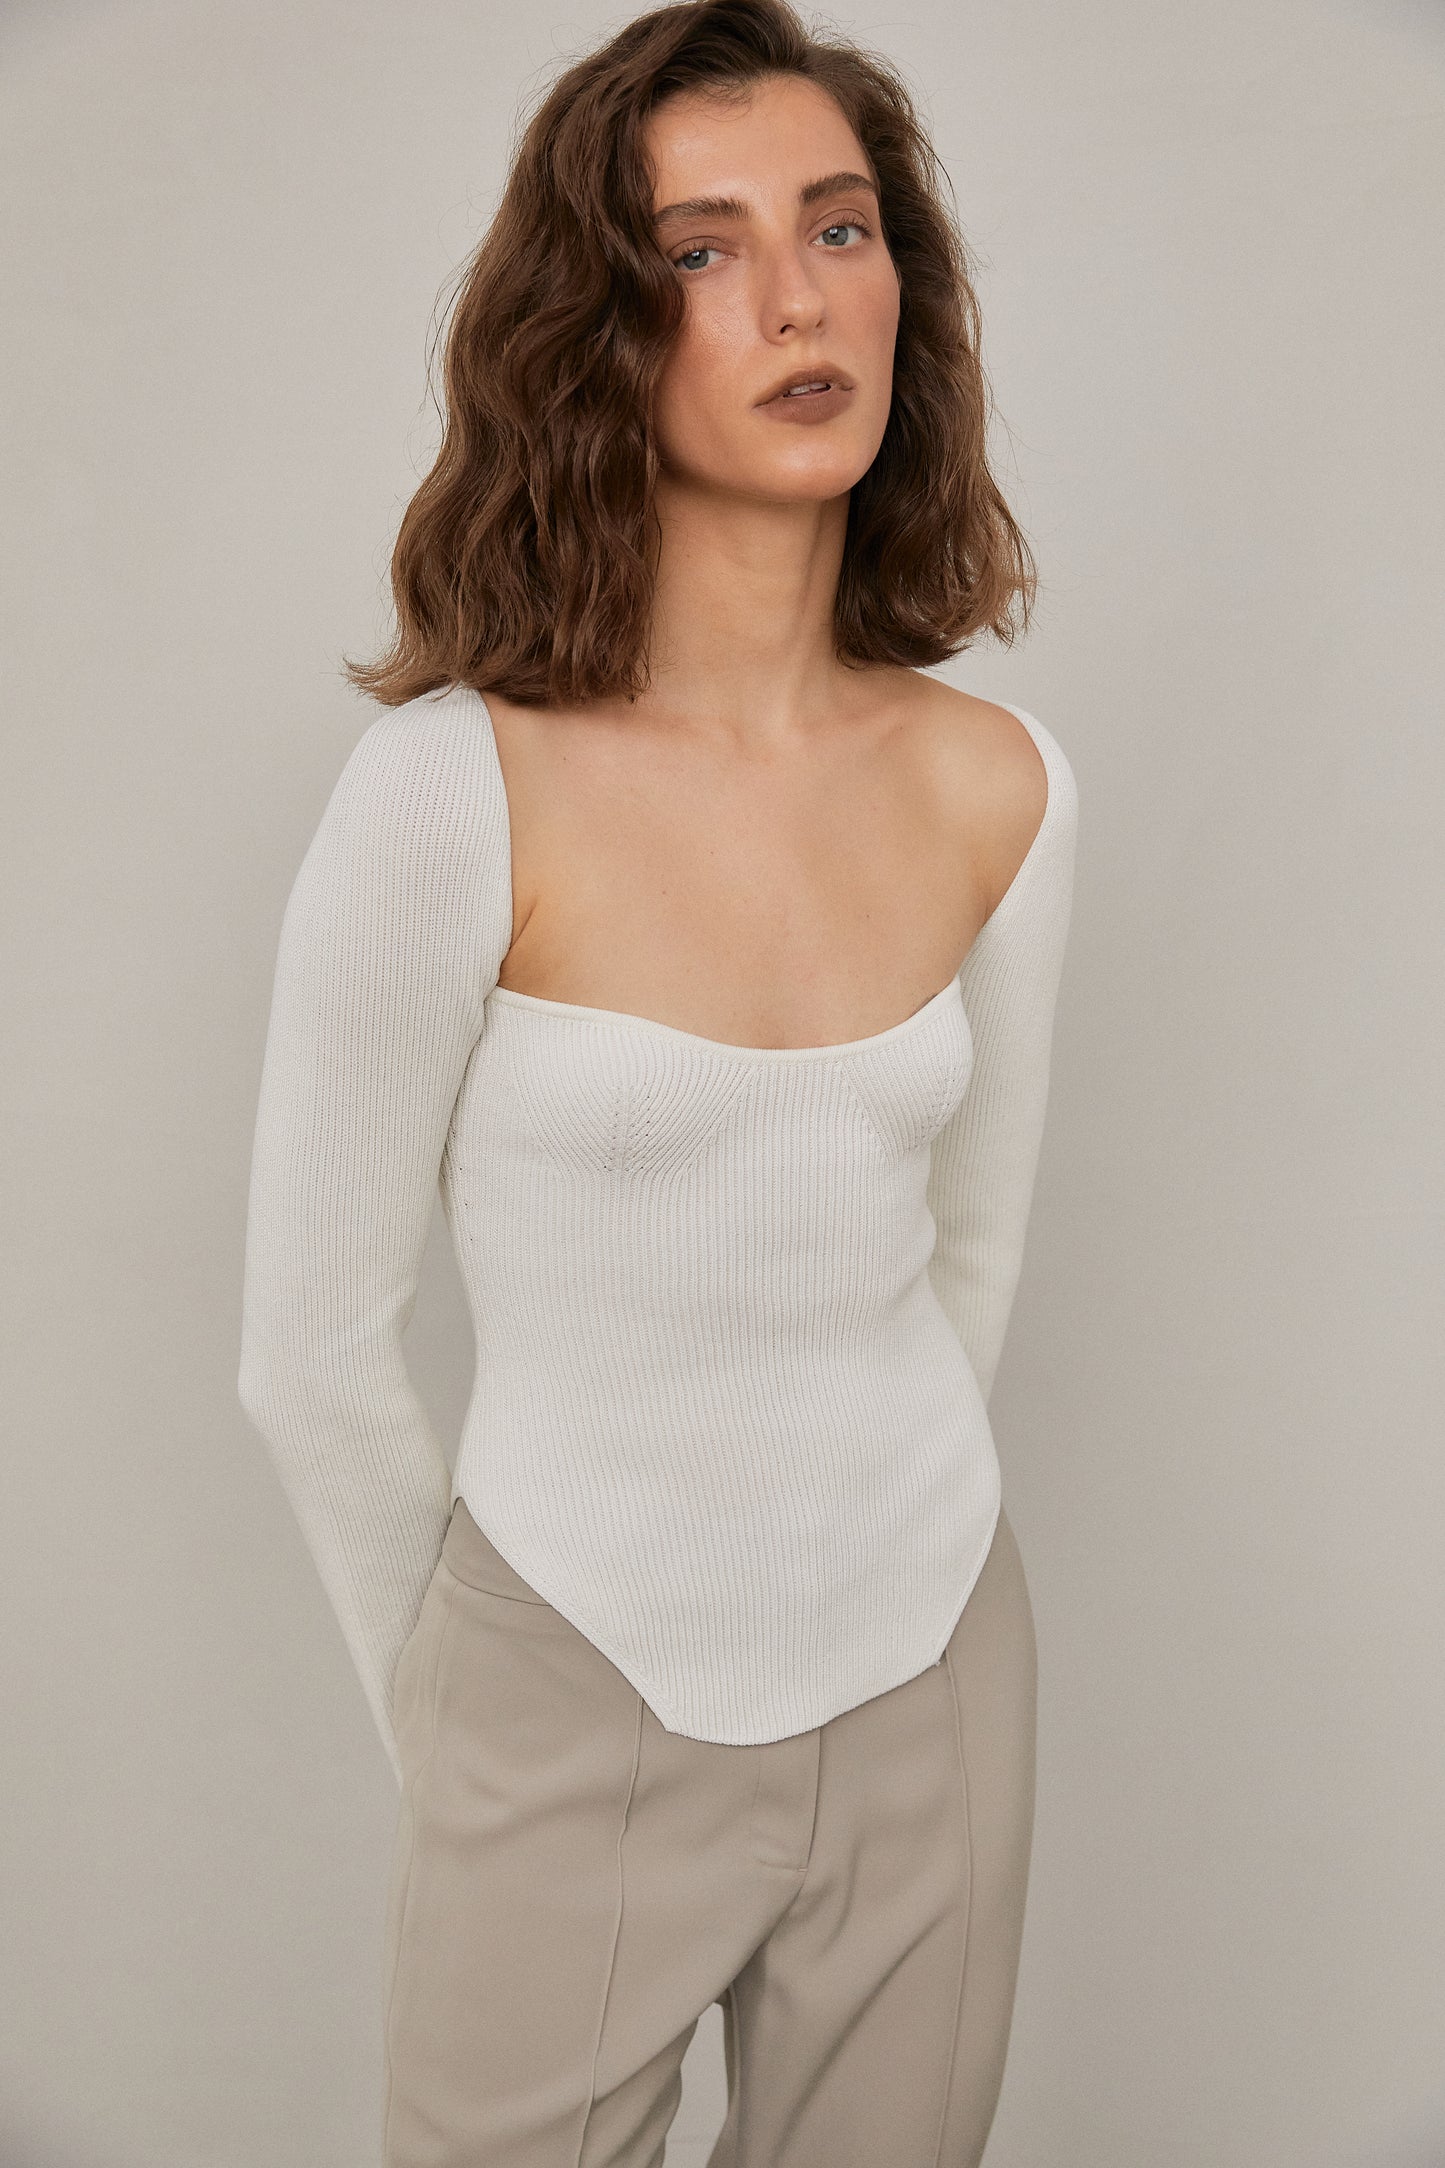 Sweetheart Neckline Ribbed Knit, Ivory – SourceUnknown